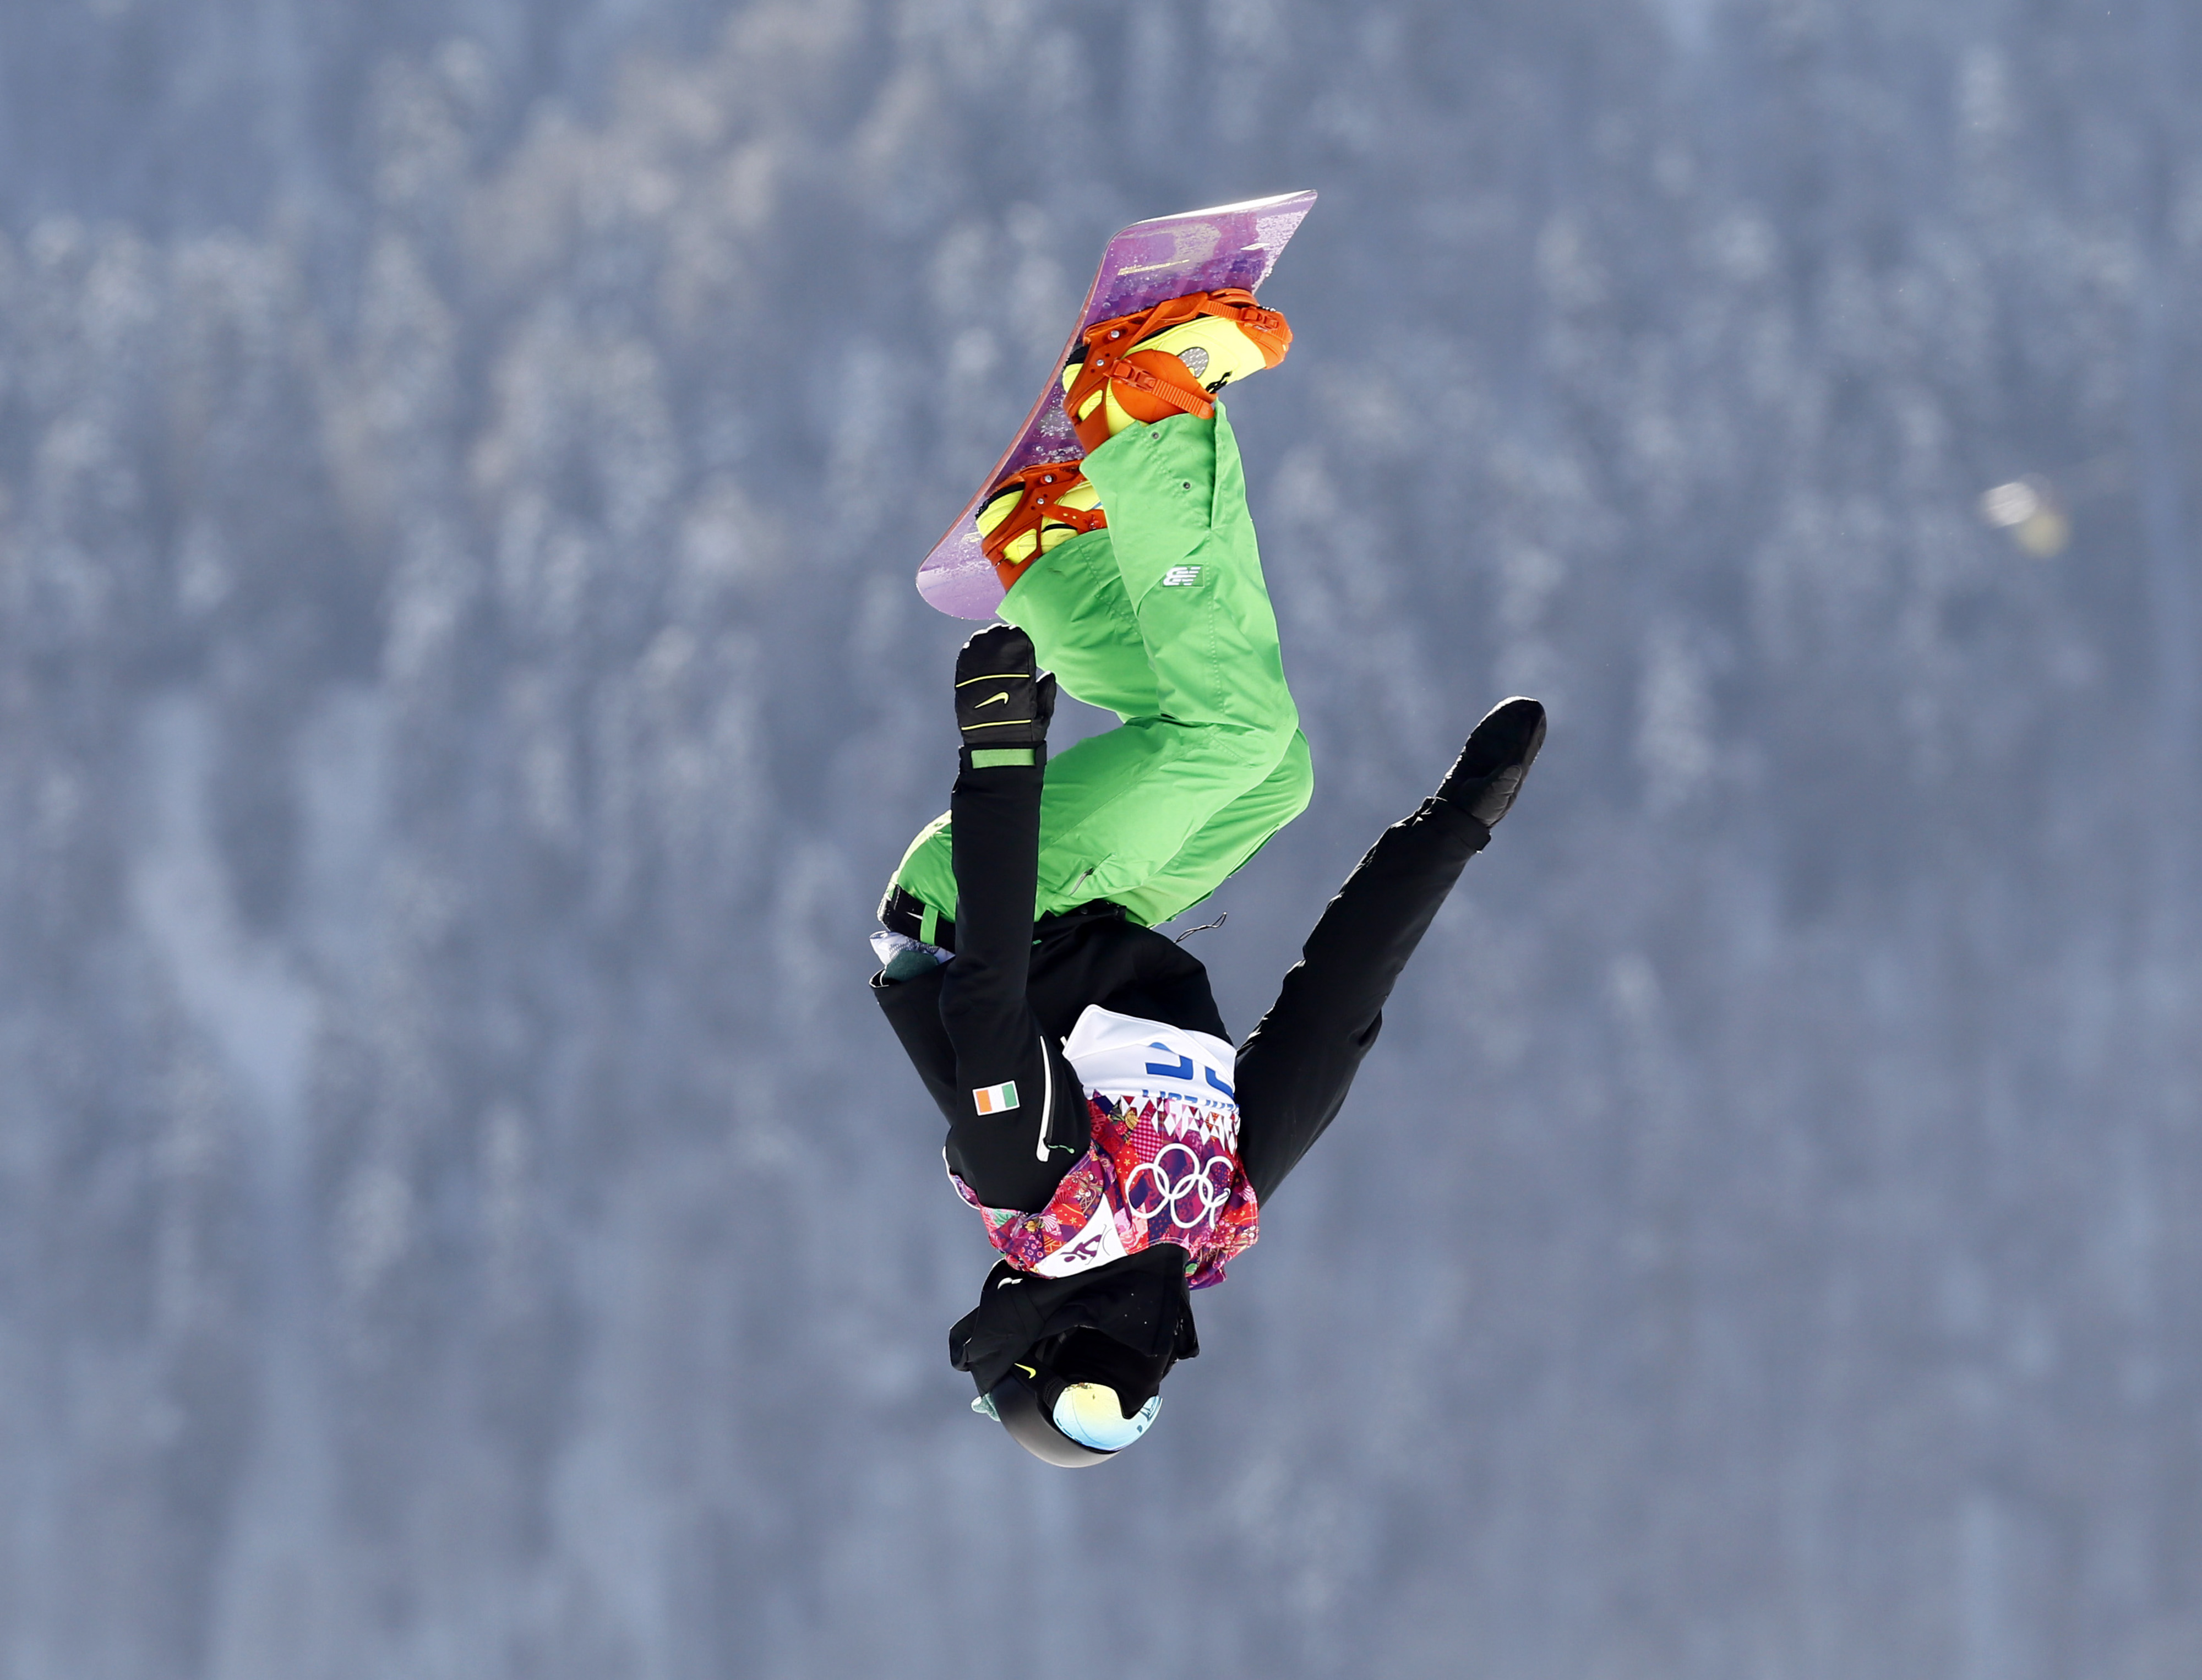 Winter Olympics 2014 The Best Photos From Day 1 In Sochi Crooks And Liars